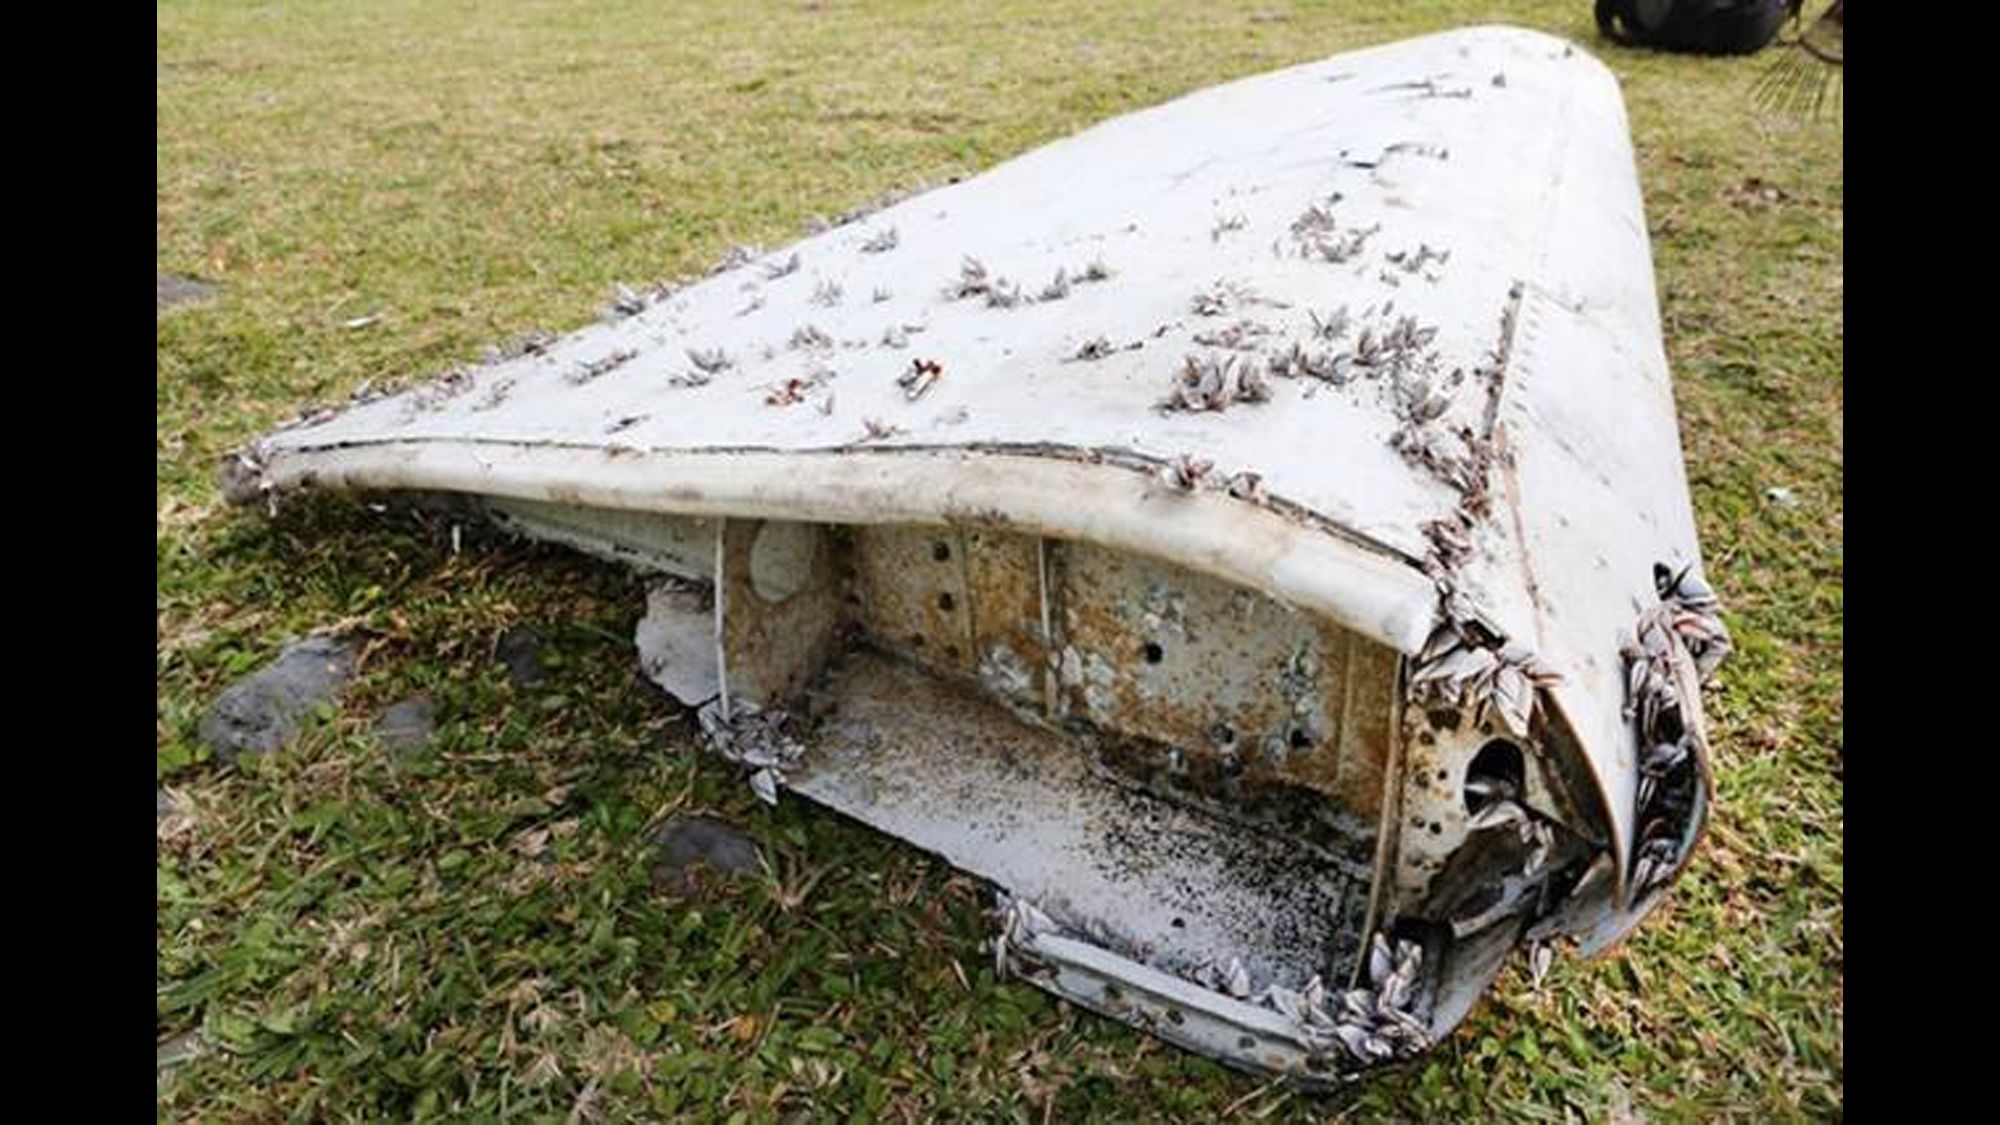 mh370 found in indian ocean